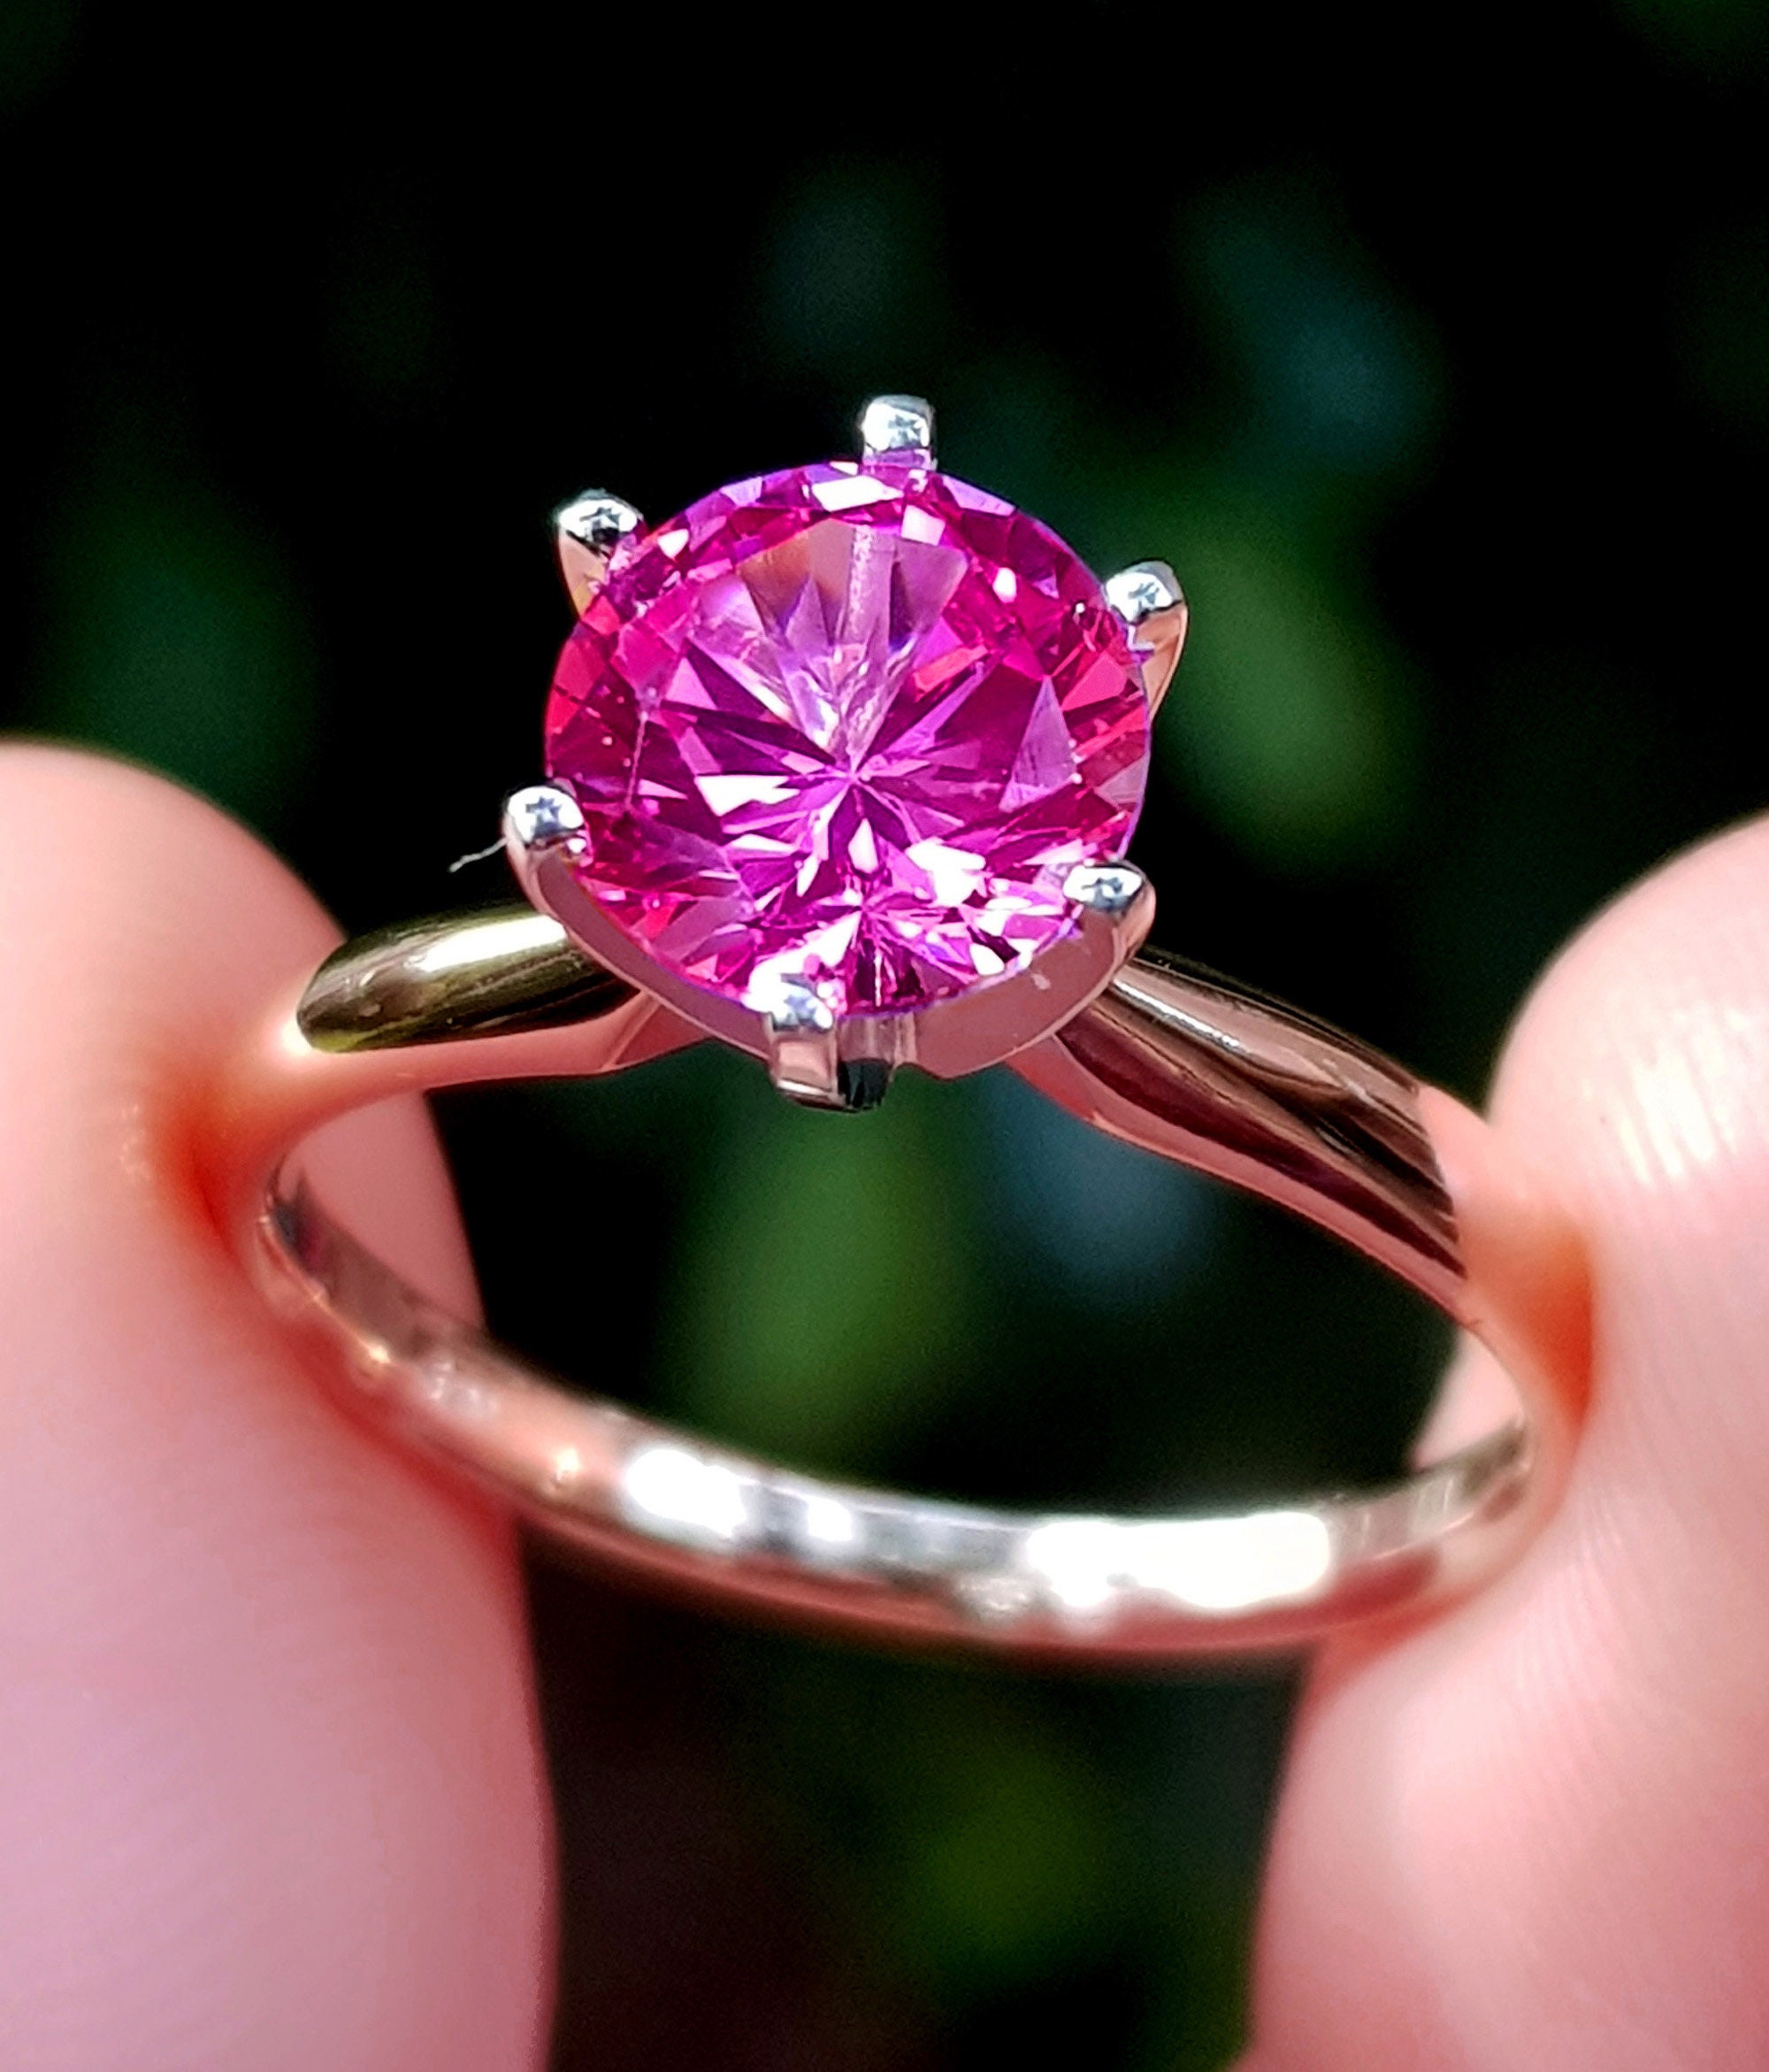 Classic Angel 14K Rose Gold 1.0 ct Light Pink Sapphire Diamond Solitaire Engagement Ring R482-14KRGDLPS